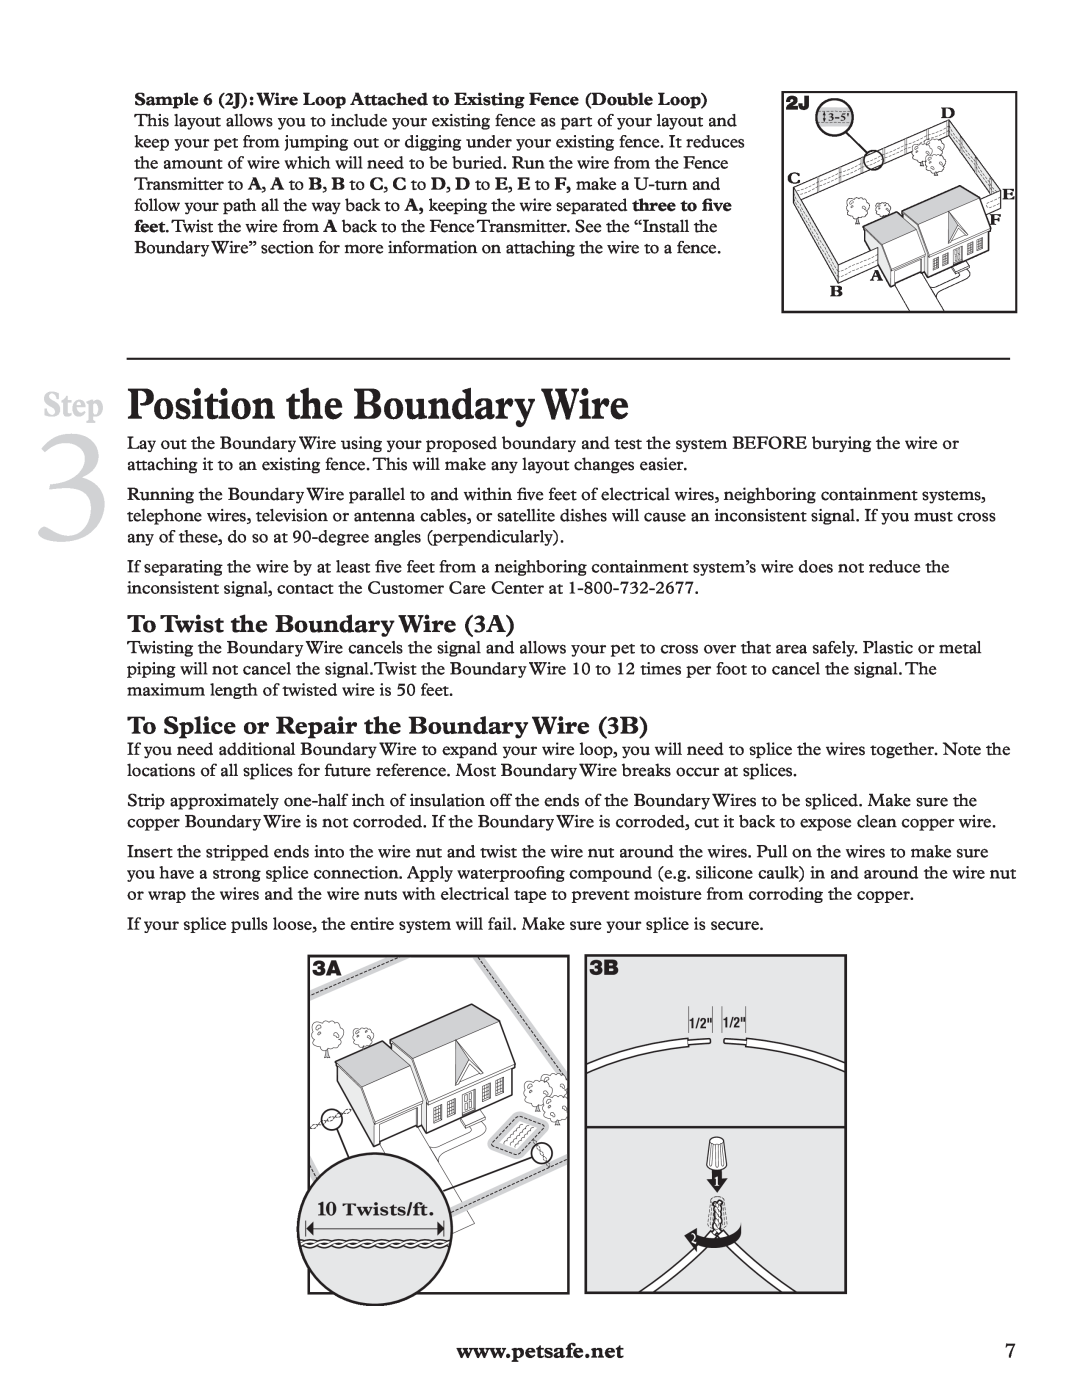 Petsafe RFA-200 Position the Boundary Wire, To Twist the Boundary Wire 3A, To Splice or Repair the Boundary Wire 3B, Step 